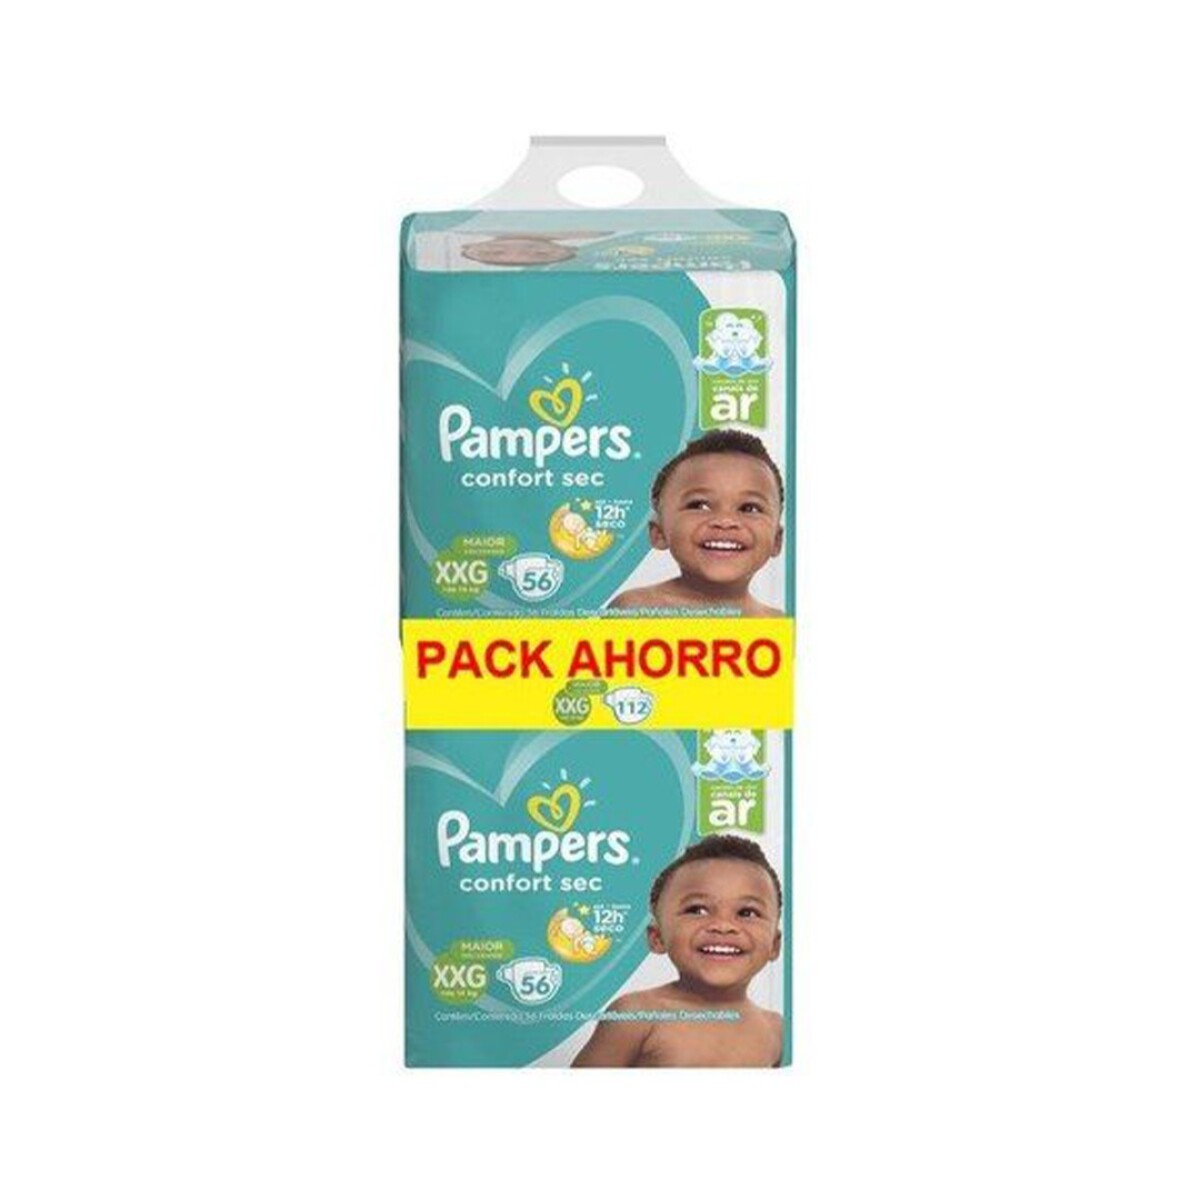 Pack X 112 Pañales Pampers Confort Sec Xxg - 001 